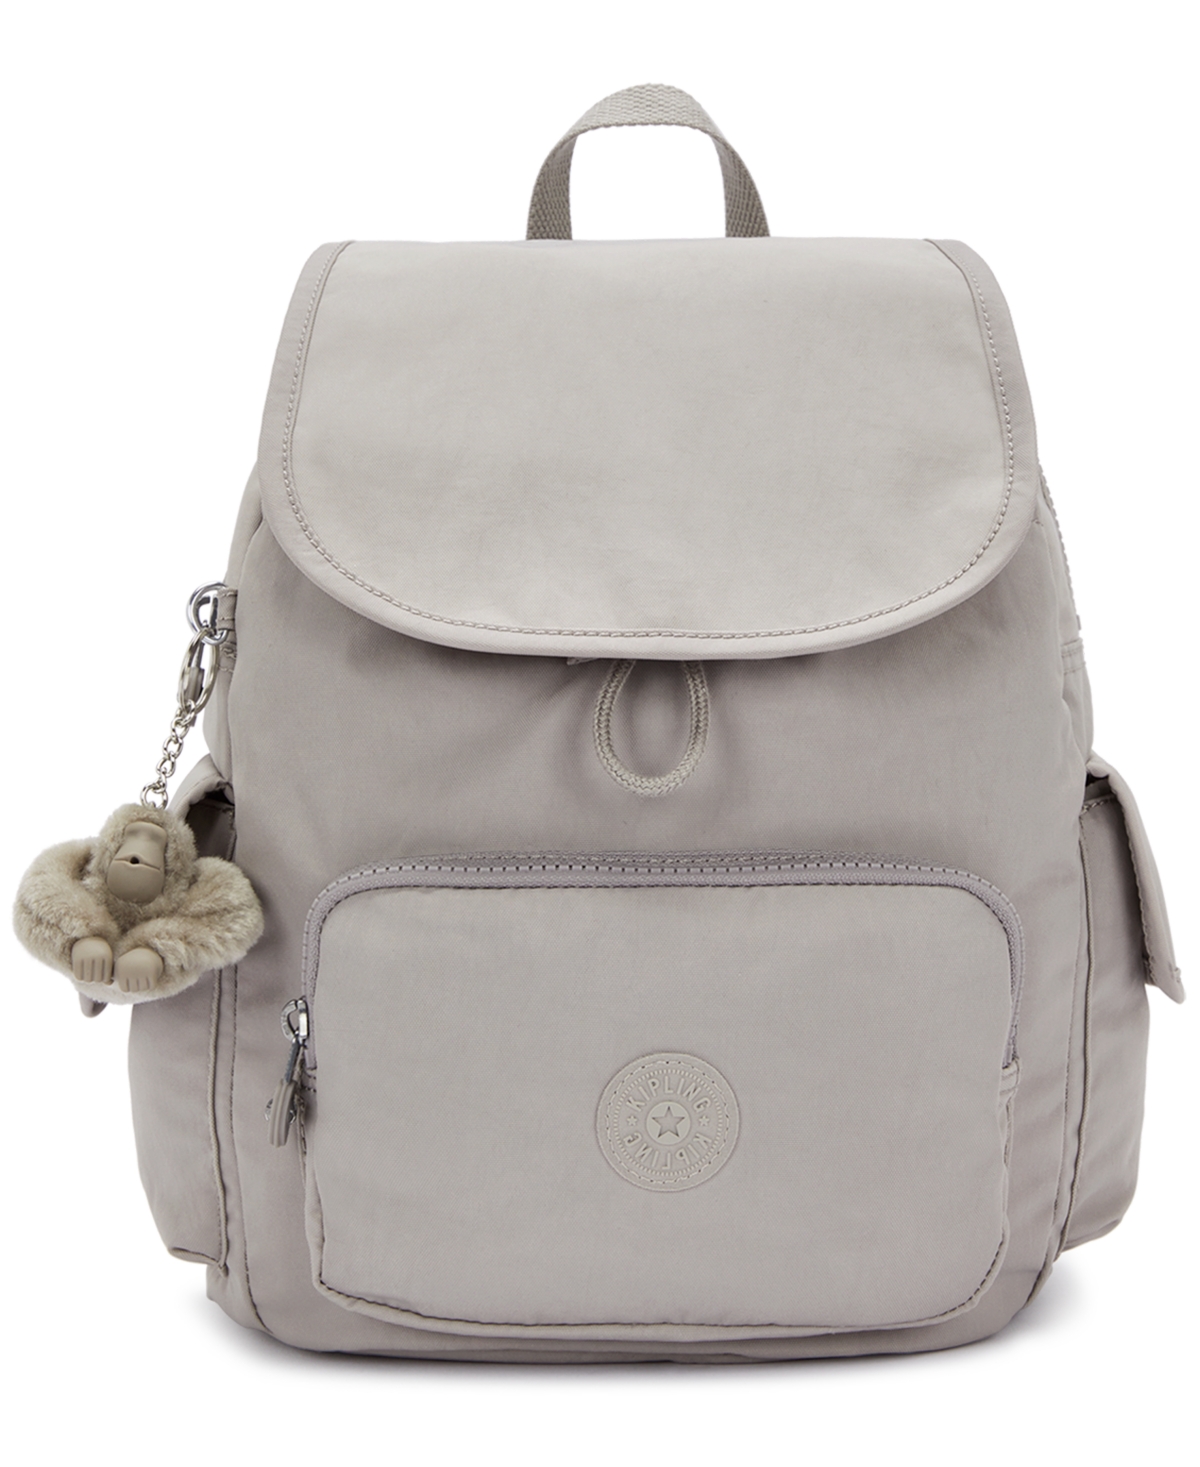 City Pack Backpack - Gray Gris